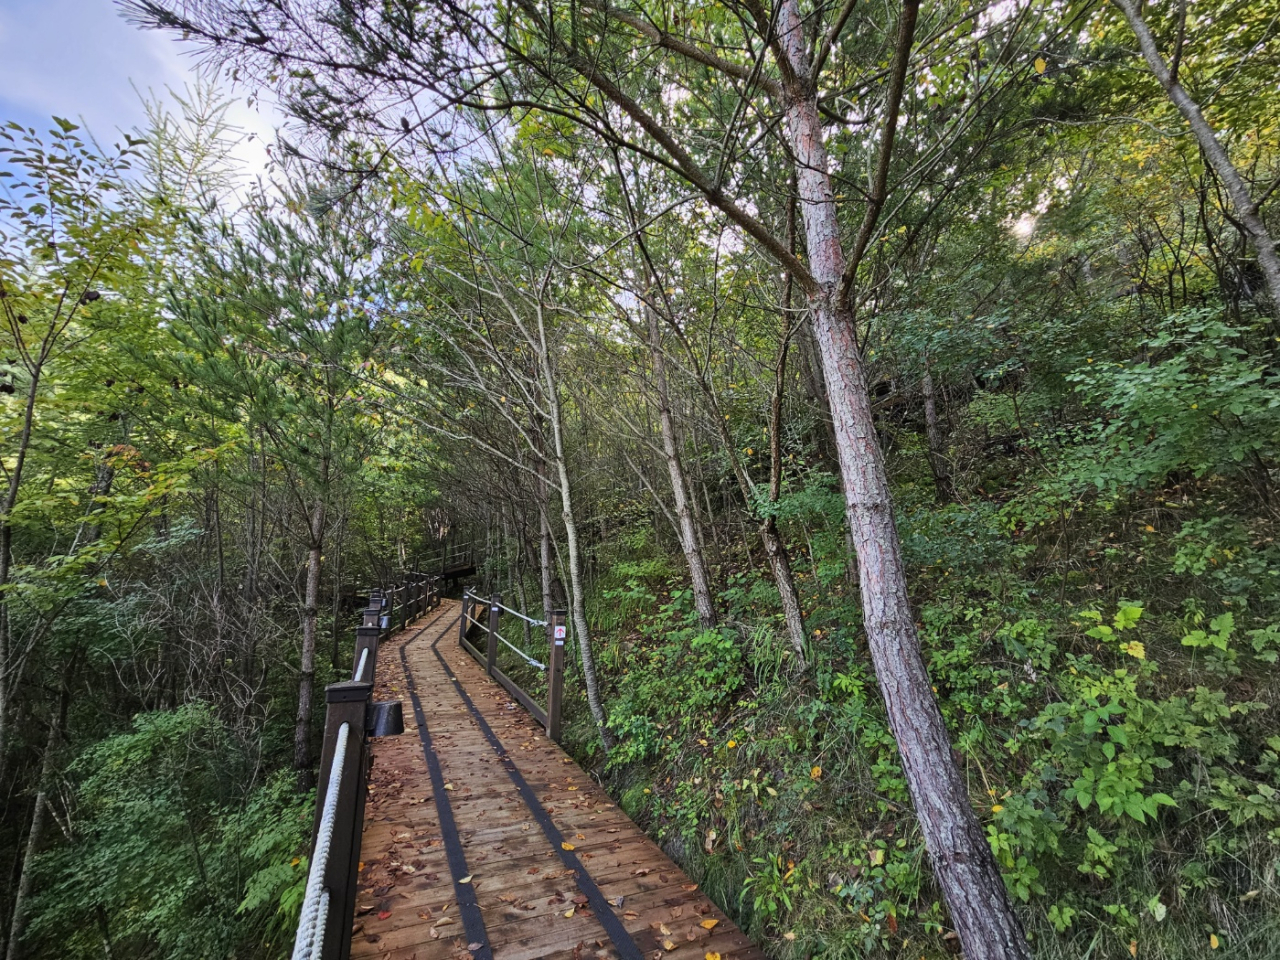 The Snail Forest Trail from Kangwon Land to the High1 Wellness Center (Kim Hae-yeon/ The Korea Herald)